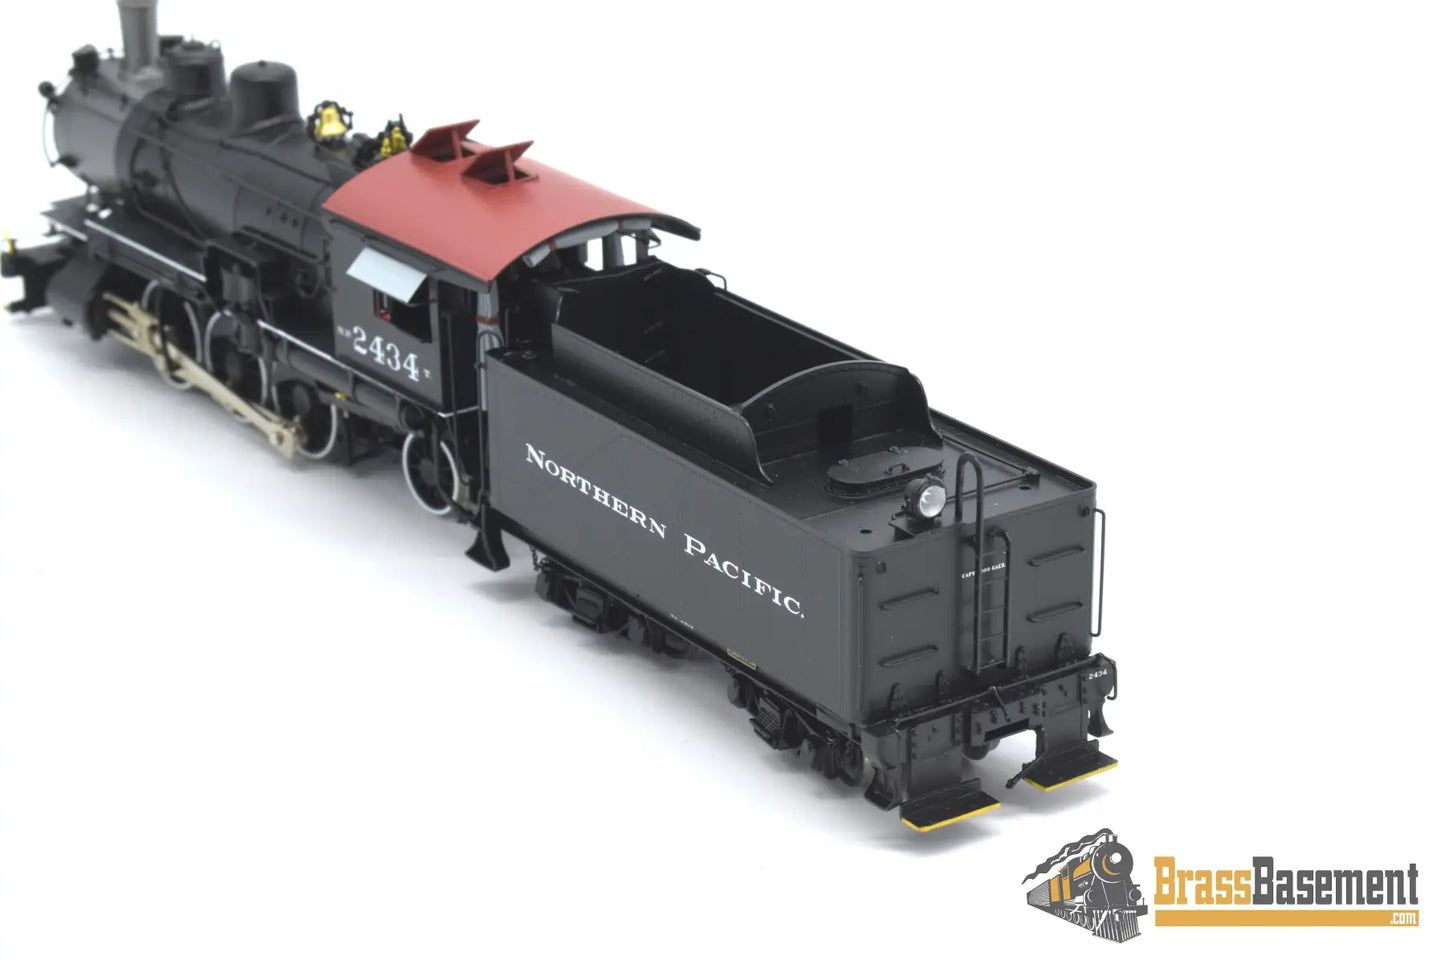 Ho Brass - W&R Northern Pacific Np T - 1 2 - 6 - 2 #2434 Version 4 W/ Nbr Brds Mint Condition Steam